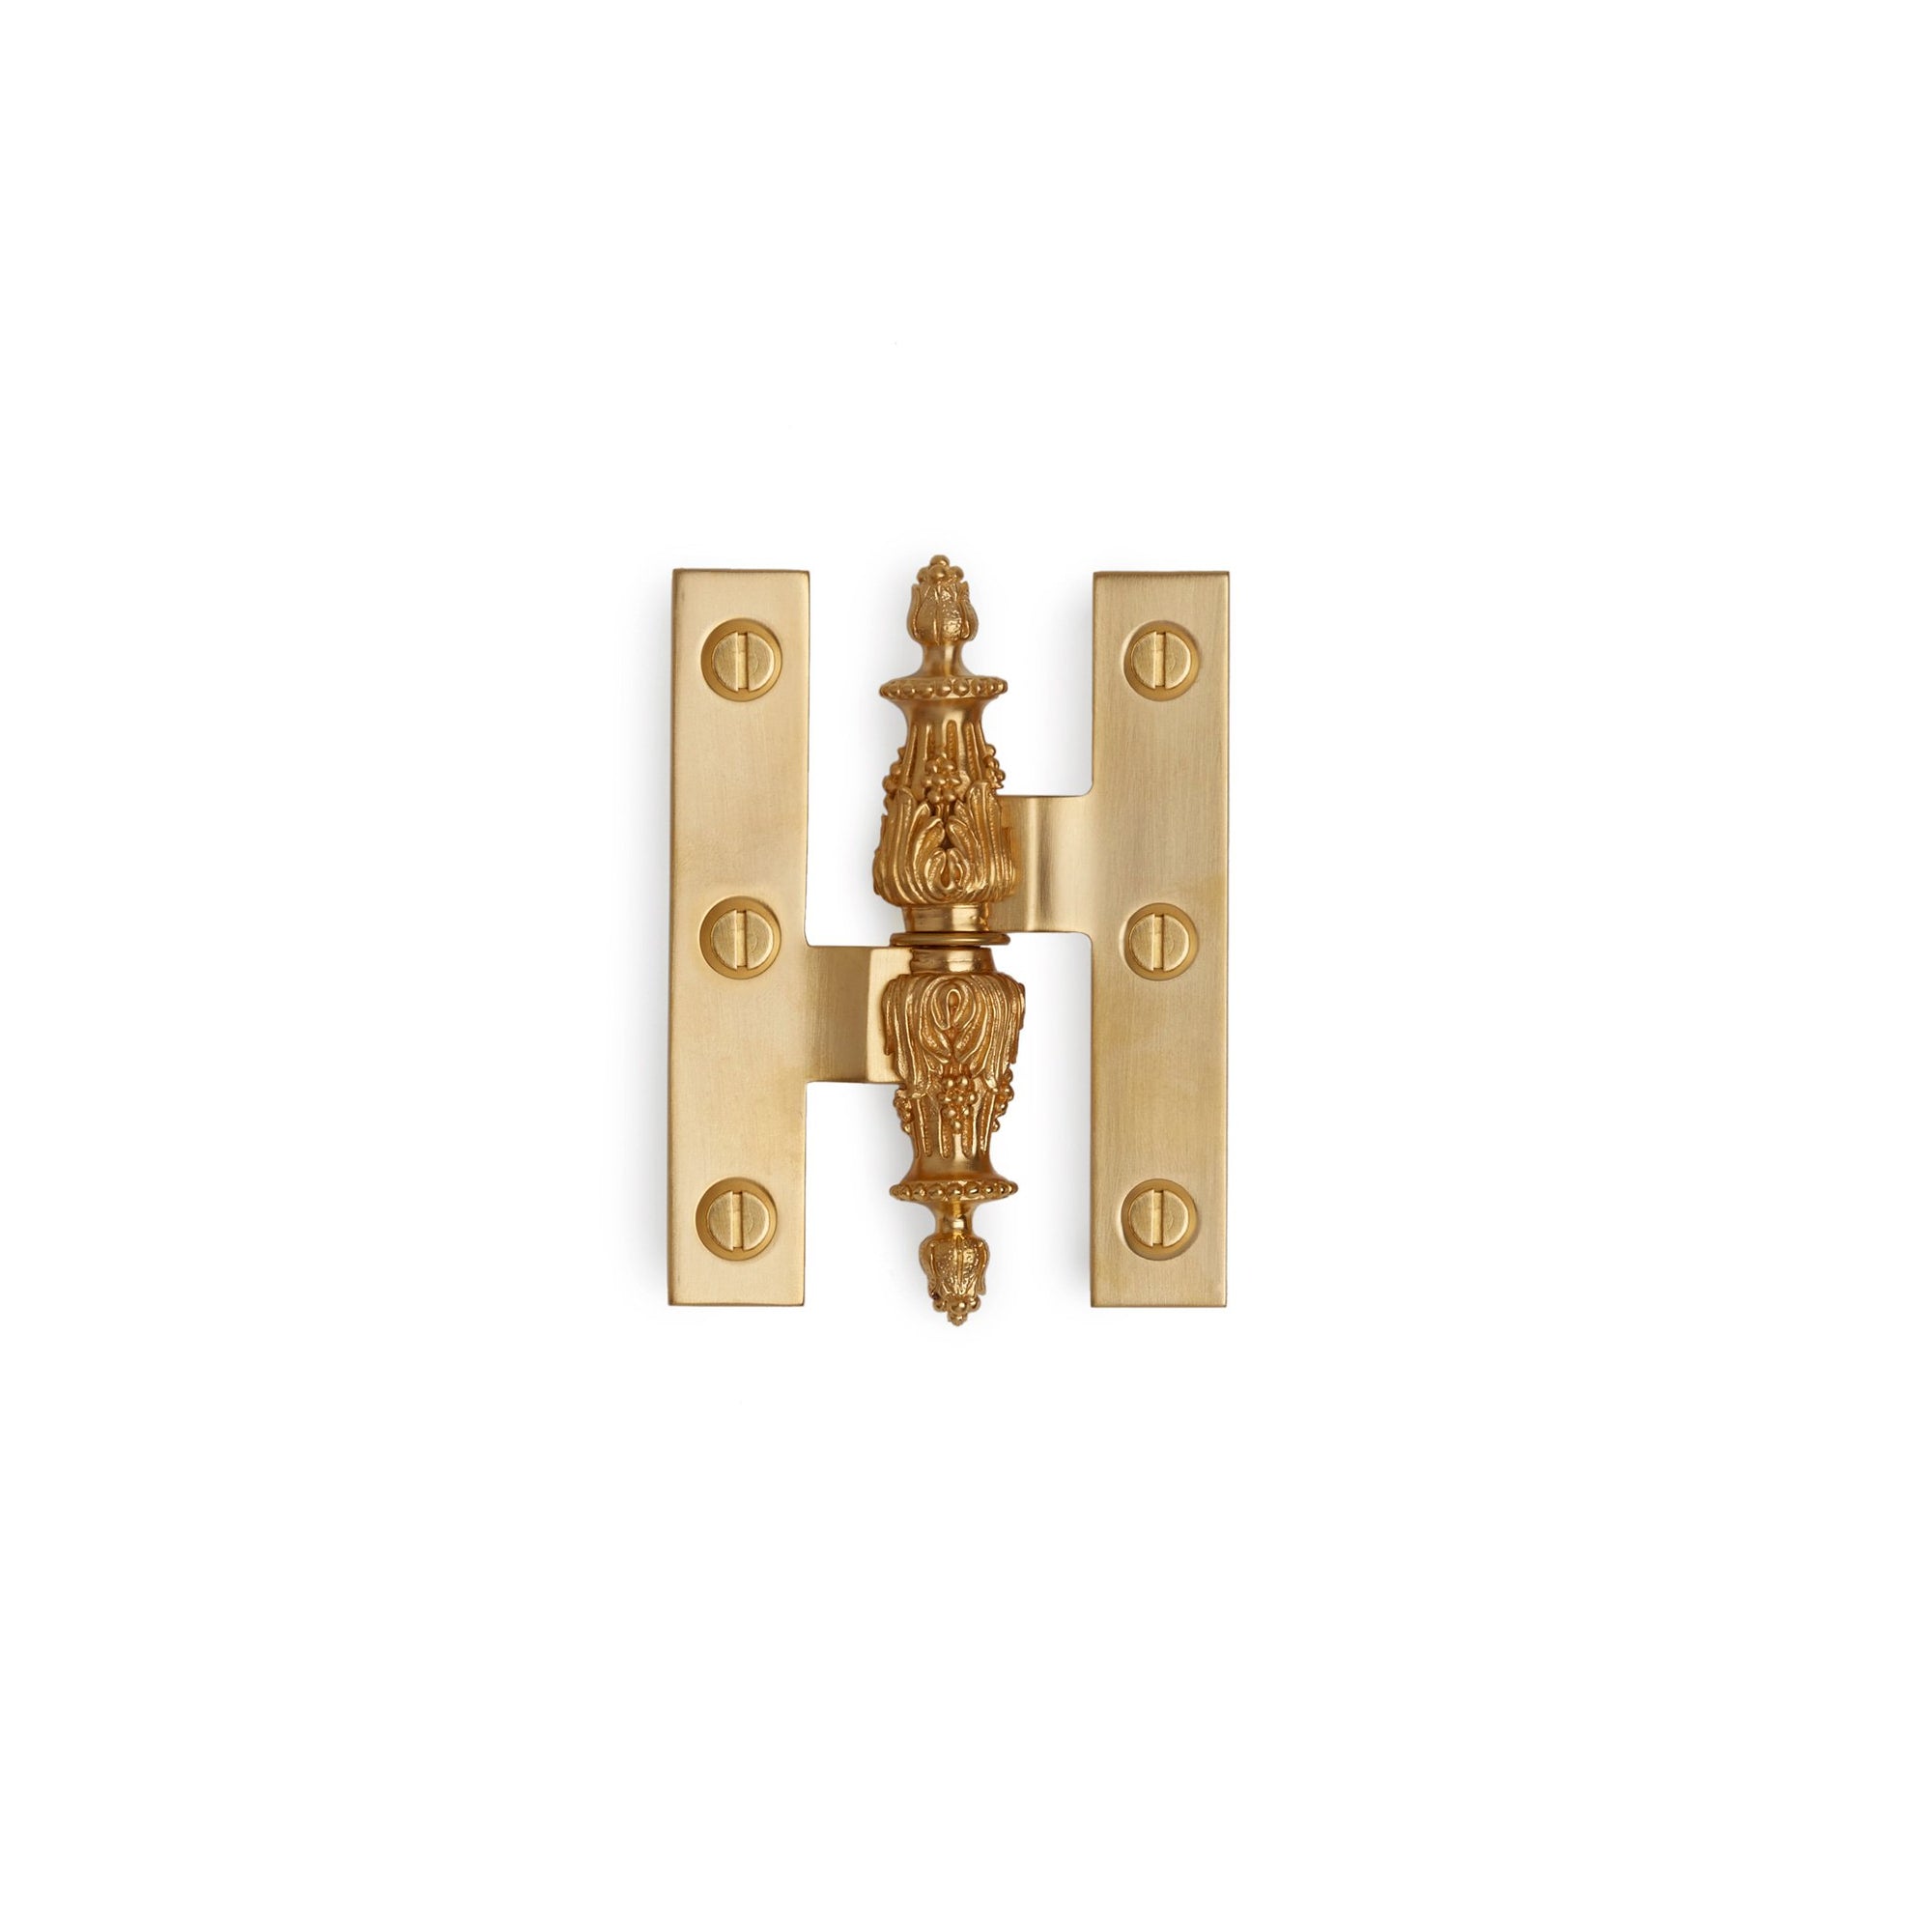 1036-4-ZZ-GP Sherle Wagner International Louis Seize Cabinet Hinge in Gold Plate metal finish